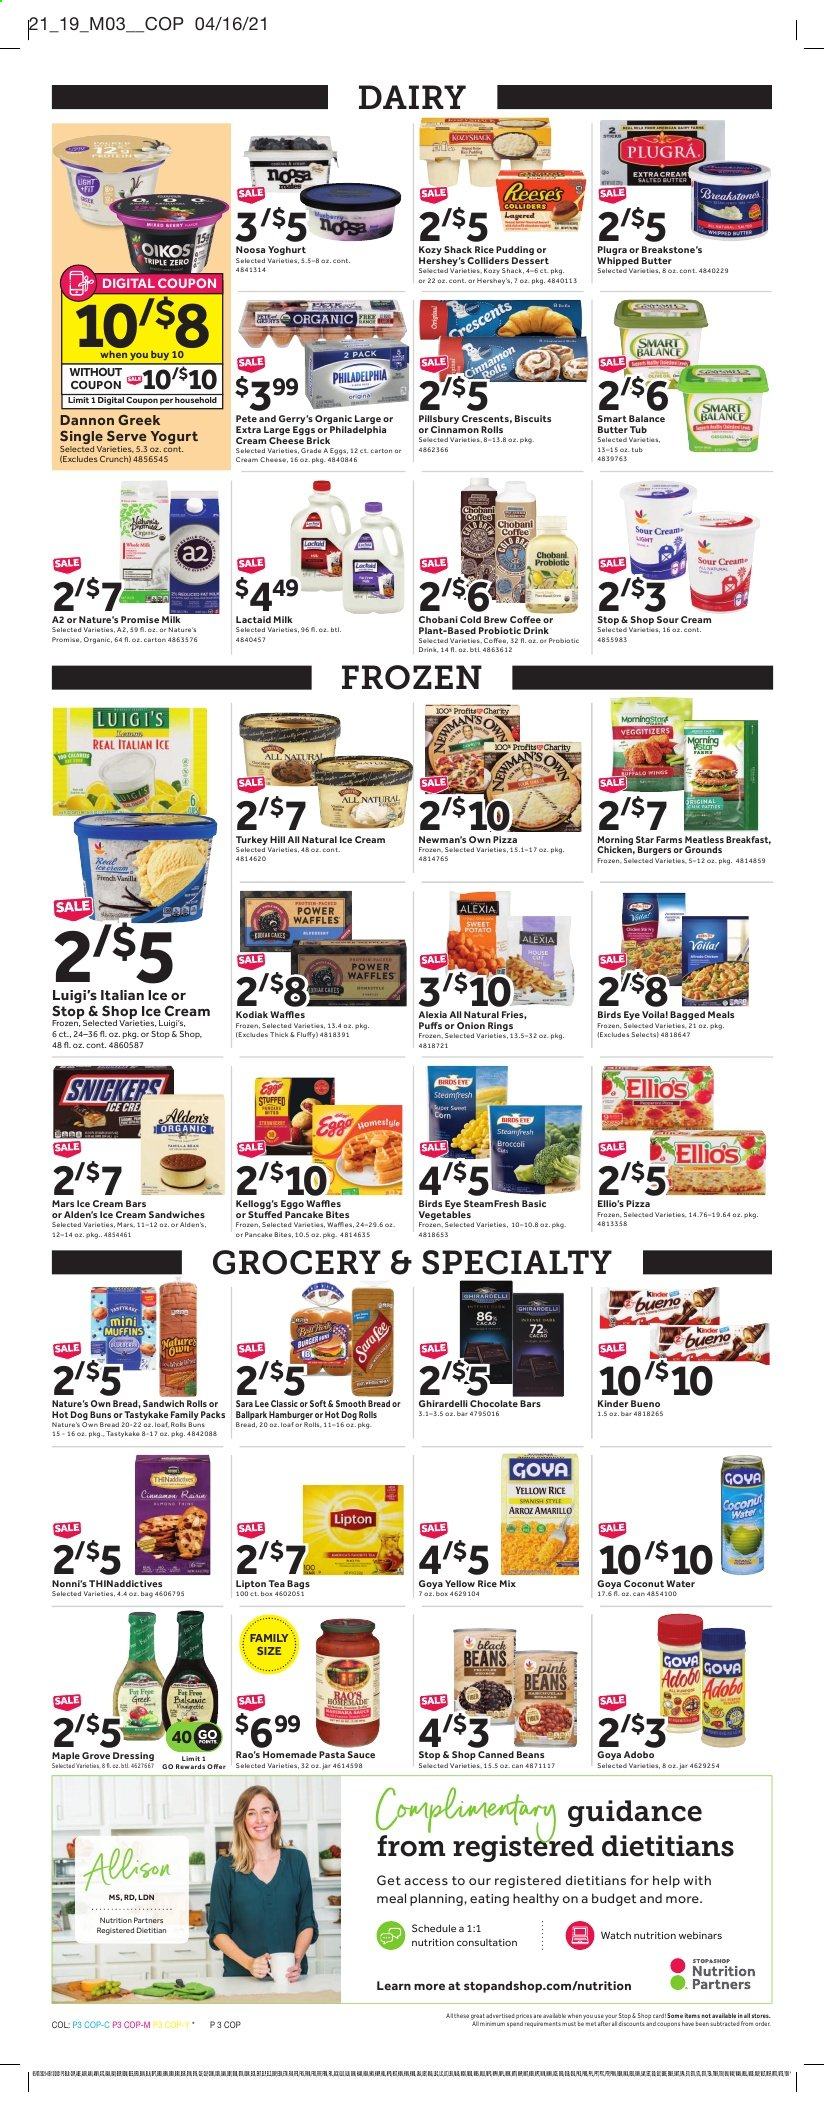 thumbnail - Stop & Shop Flyer - 05/07/2021 - 05/13/2021 - Sales products - hot dog rolls, buns, Nature’s Promise, Sara Lee, sandwich rolls, cinnamon roll, puffs, muffin, waffles, hamburger, pizza, pasta sauce, onion rings, sauce, pancakes, Pillsbury, Bird's Eye, Lactaid, Philadelphia, yoghurt, Oikos, Chobani, Dannon, rice pudding, milk, large eggs, whipped butter, salted butter, sour cream, ice cream, ice cream bars, ice cream sandwich, Reese's, Hershey's, potato fries, Mars, Kellogg's, Kinder Bueno, biscuit, Ghirardelli, chocolate bar, Goya, adobo sauce, dressing, Lipton, coconut water, tea bags, coffee, beer, Lager, Nature's Own. Page 3.